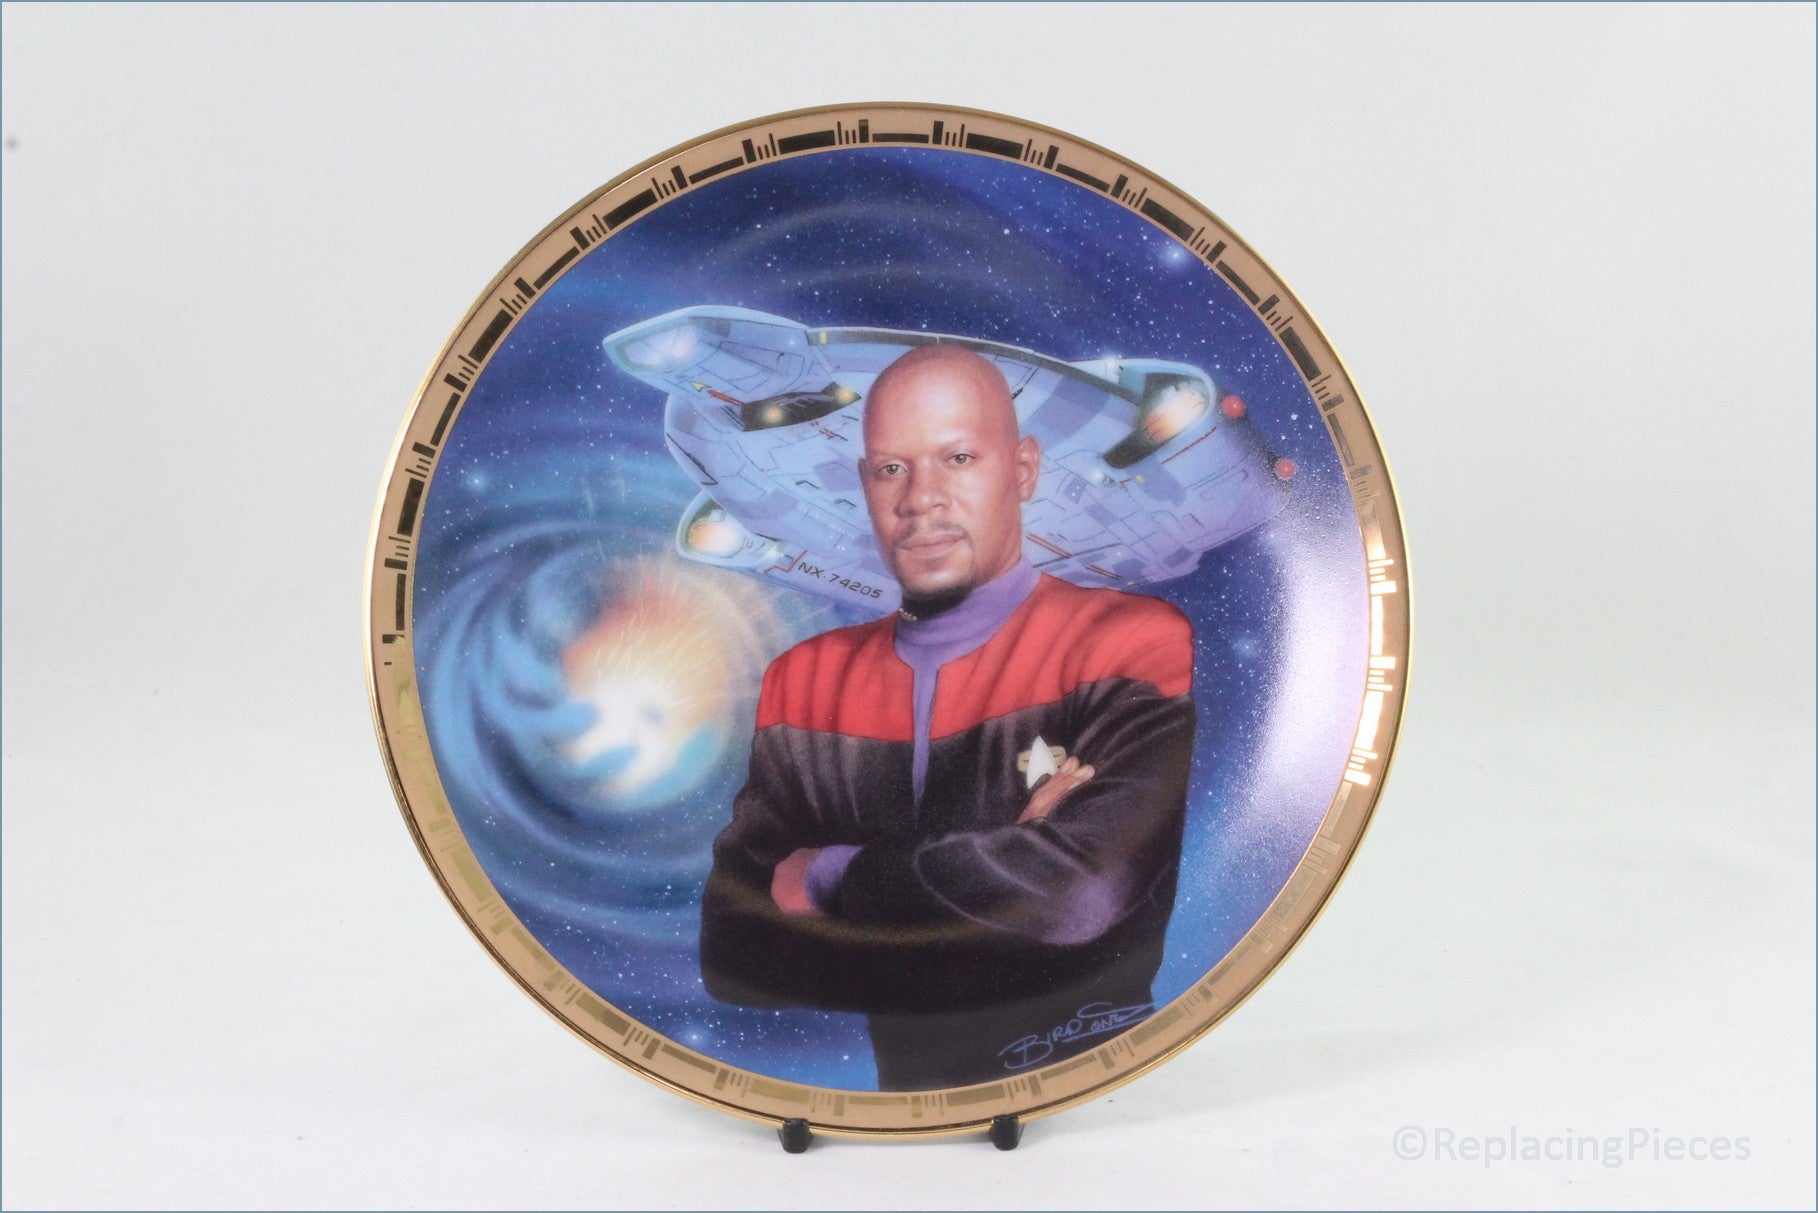 The Hamilton Collection - Star Trek 'The Next Generation' - The Power Of Command - Captain Sisko And The USS Defiant